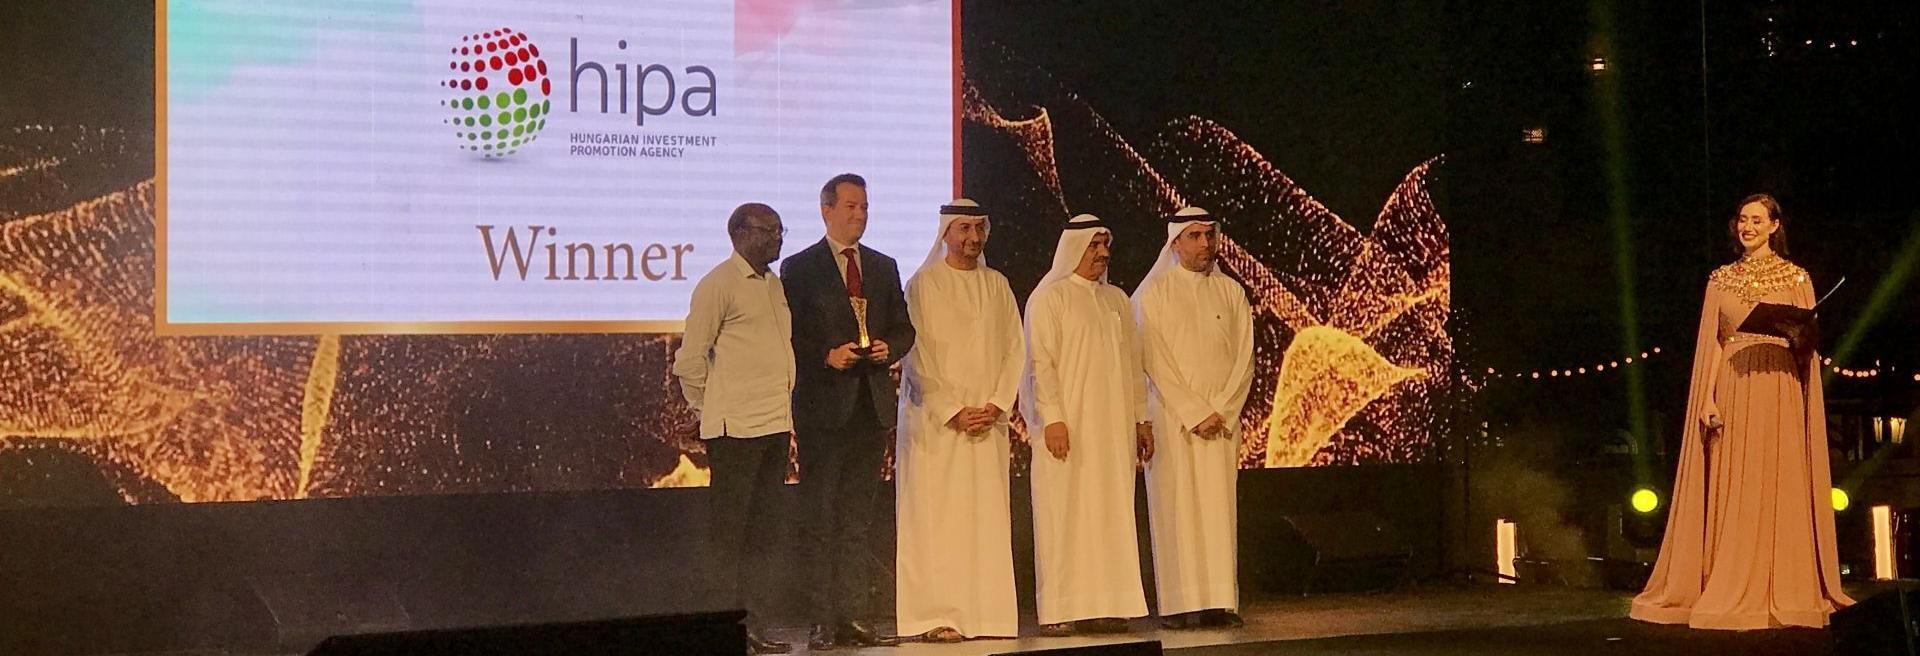 HIPA wins the AIM Annual Investment Award 2019 for its outstanding results